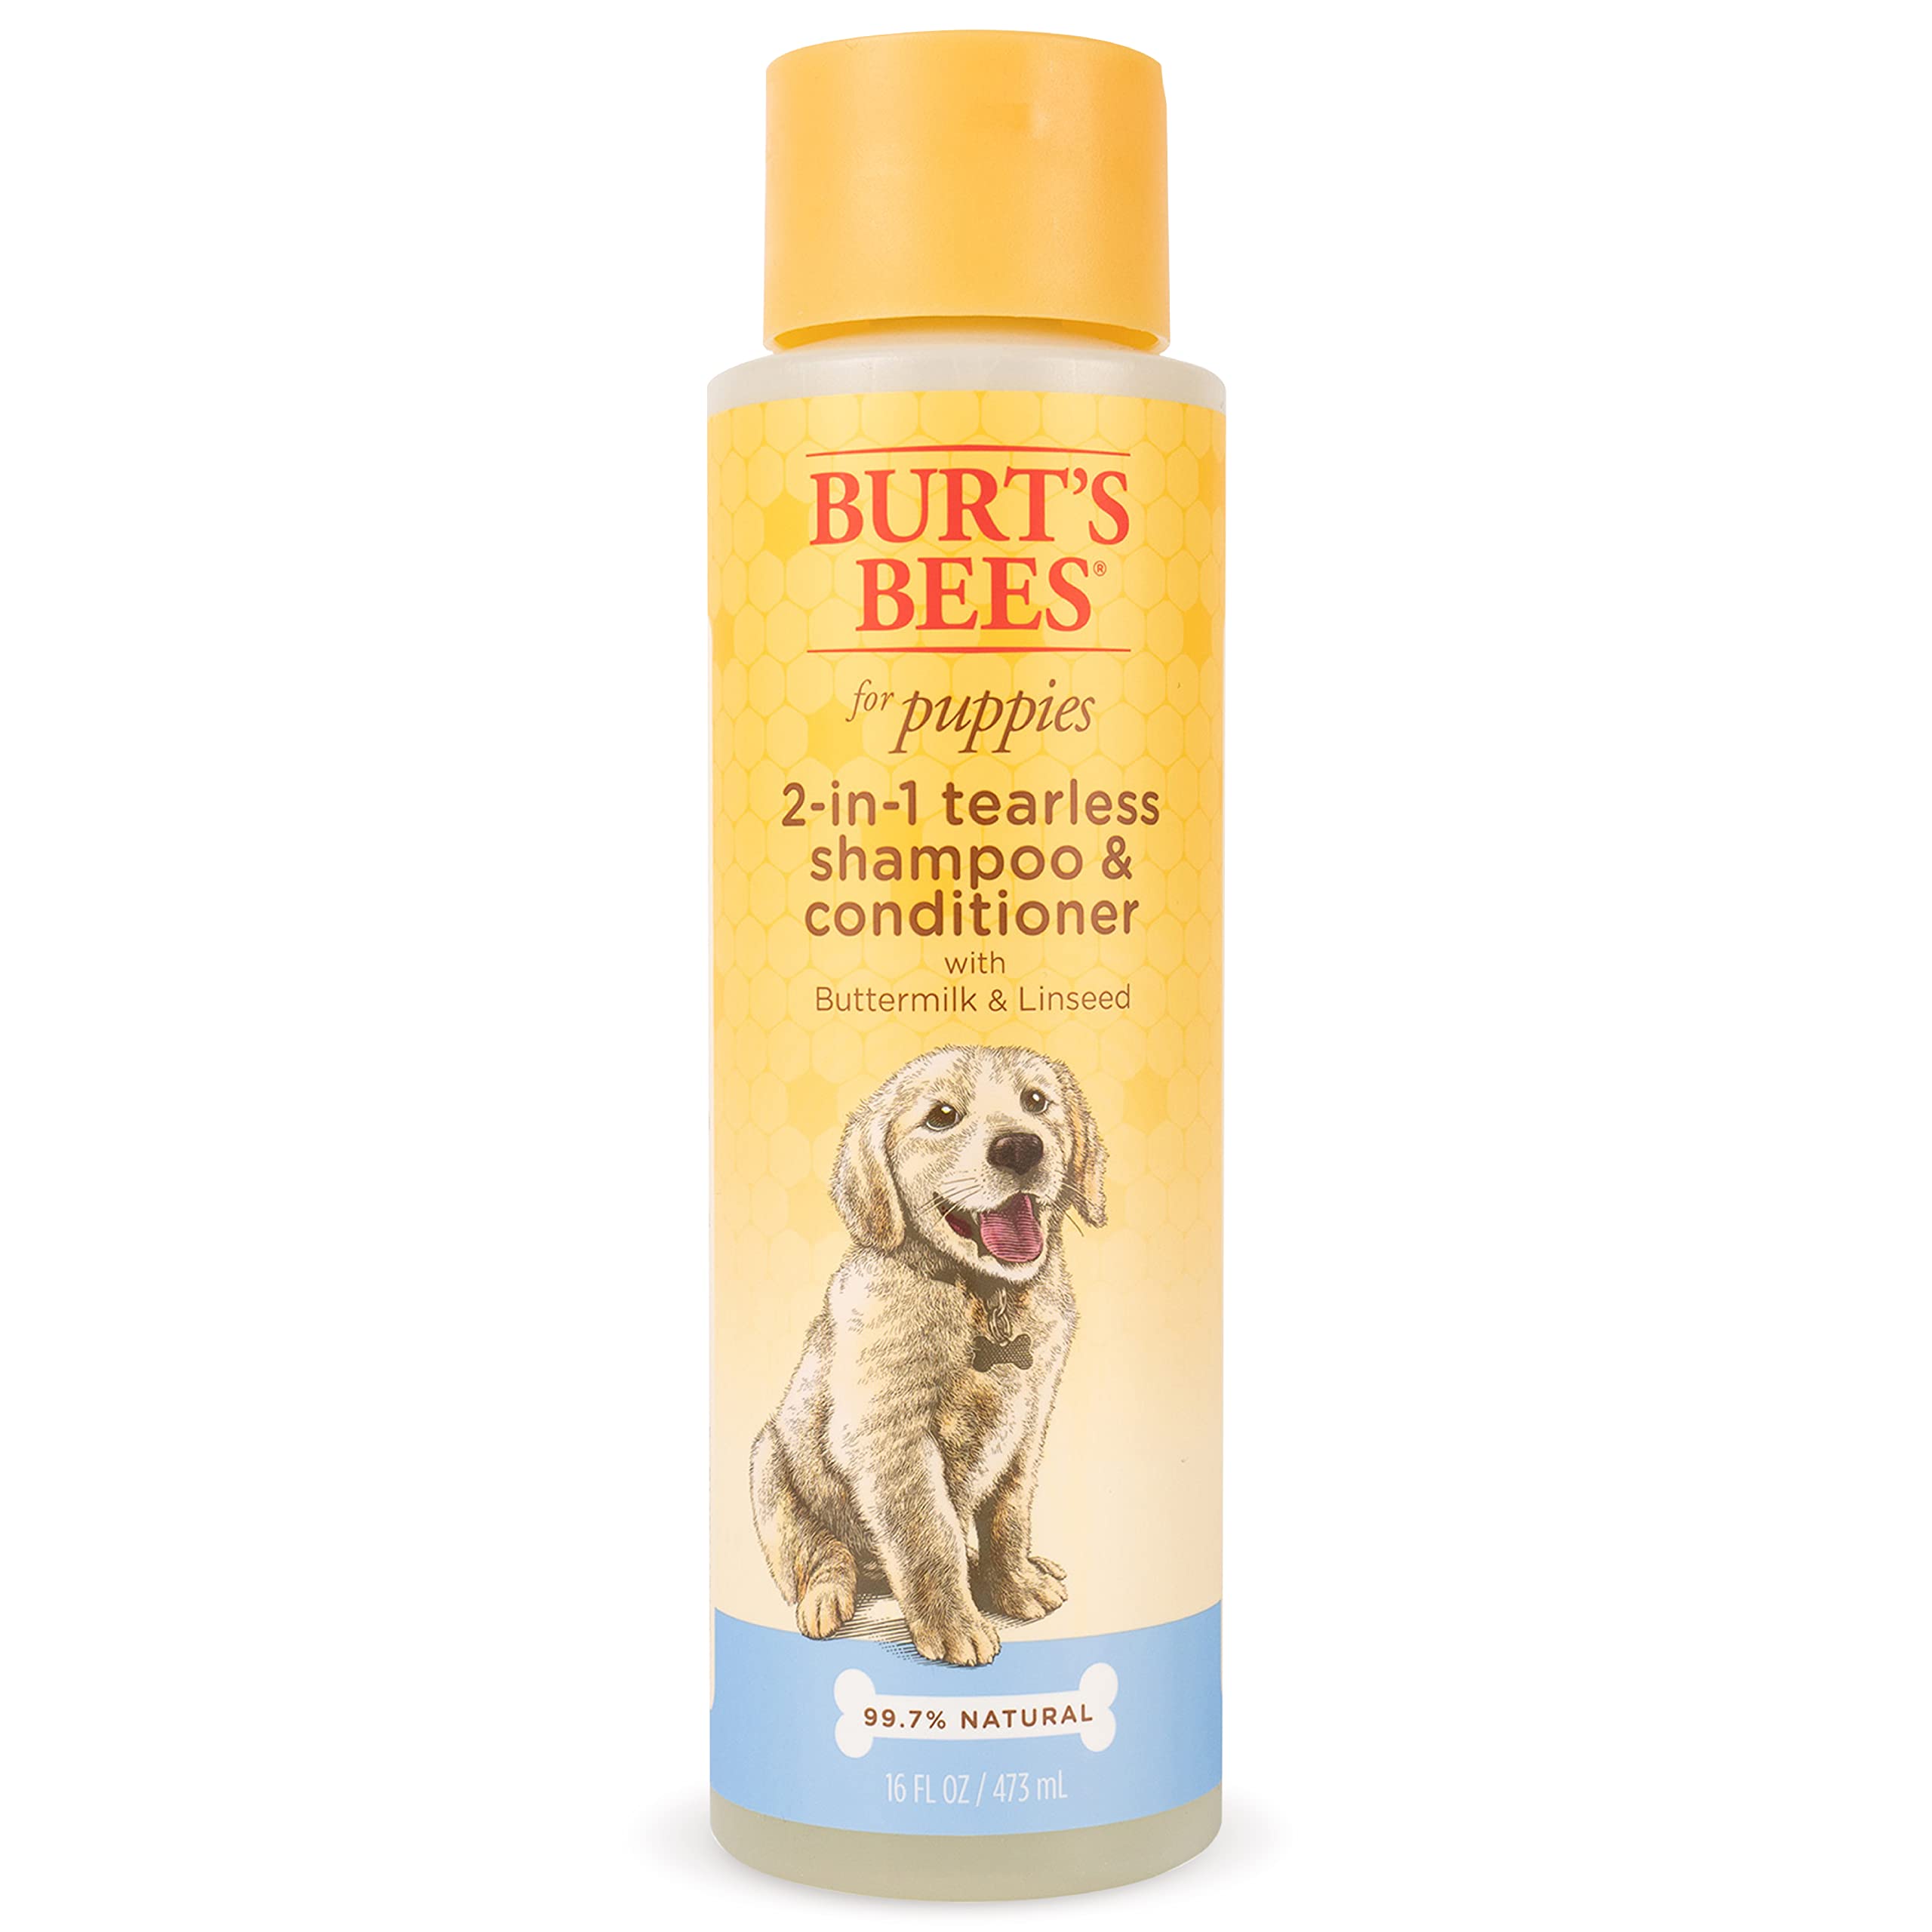 Book Cover Burt's Bees for Pets Puppies Natural Tearless 2 in 1 Shampoo and Conditioner | Made with Buttermilk and Linseed Oil | Best Tearless Puppy Shampoo for Gentle Skin and Coat | Made in USA, 16 Oz 2-in-1 Shampoo and Conditioner 16 Fl Oz (Pack of 1)